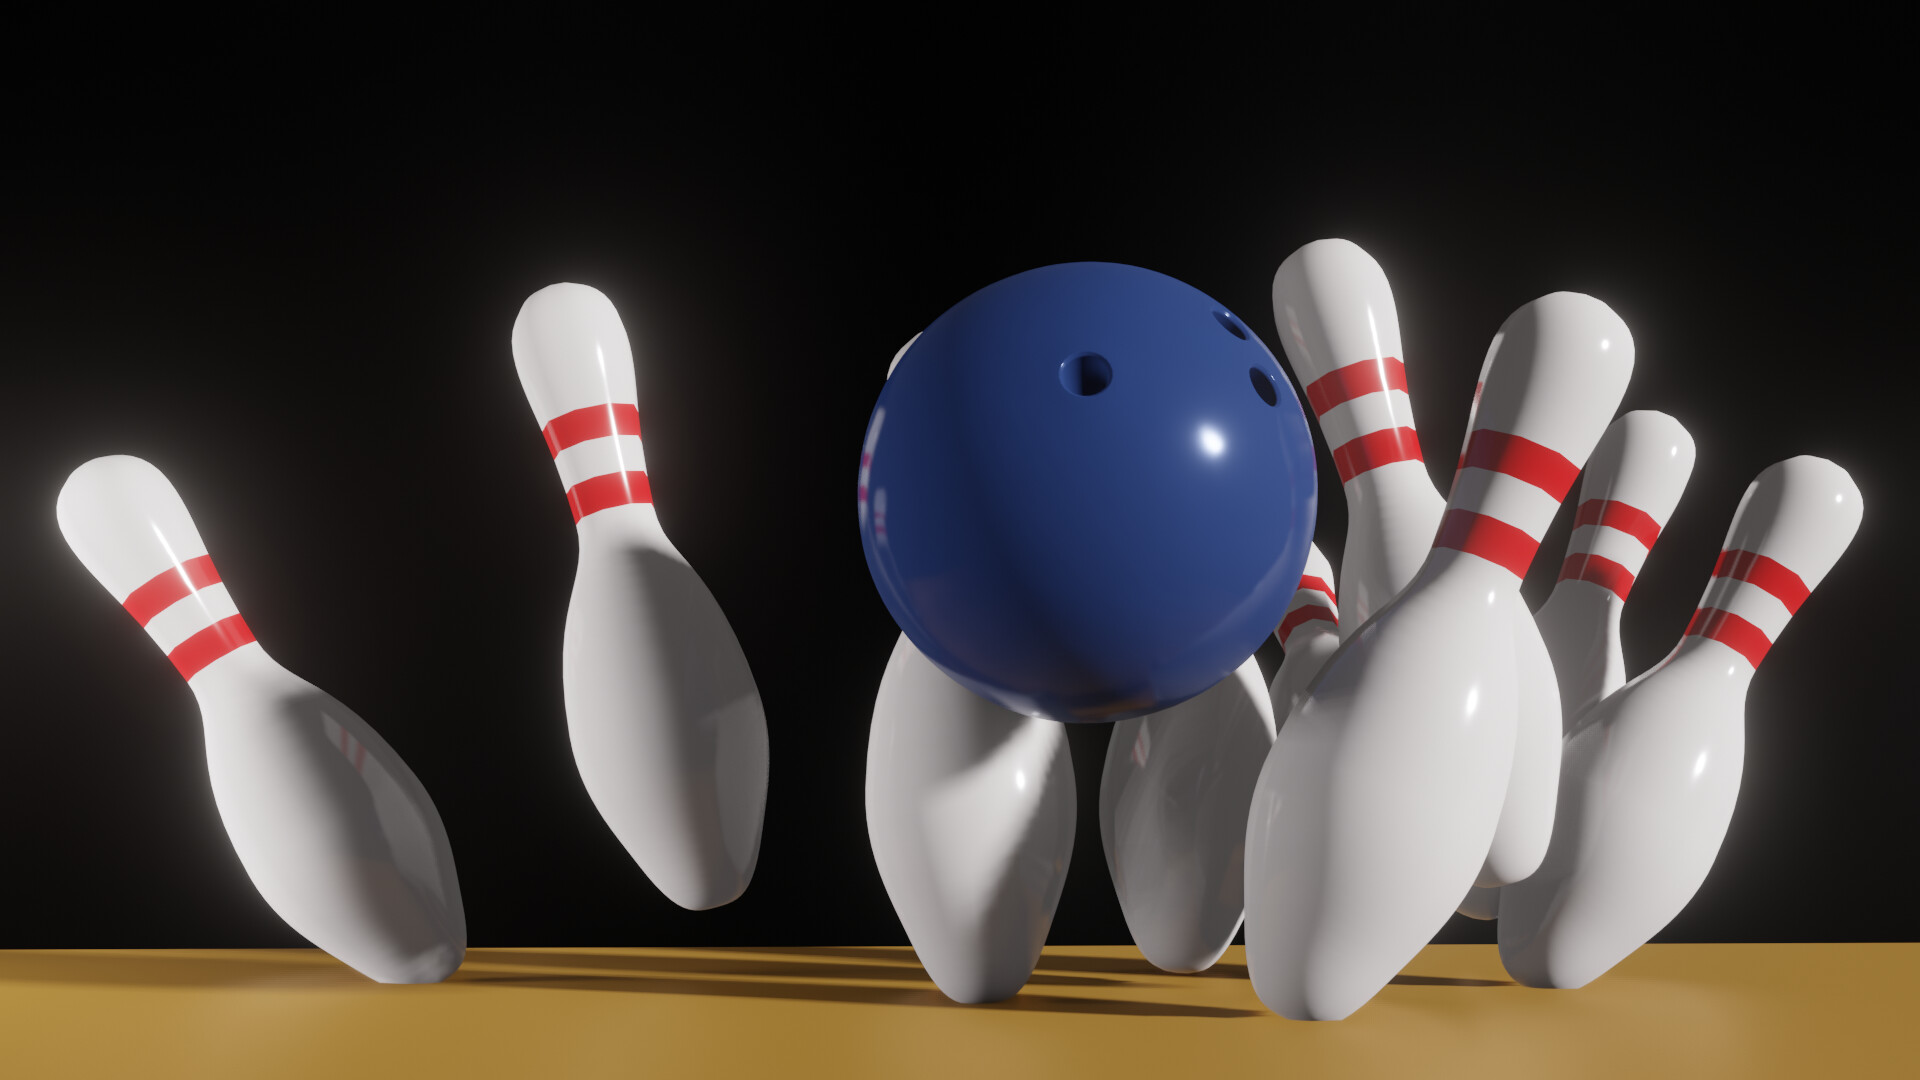 Loving the course so far! Here's my Bowling ball strike! - Show - GameDev.tv